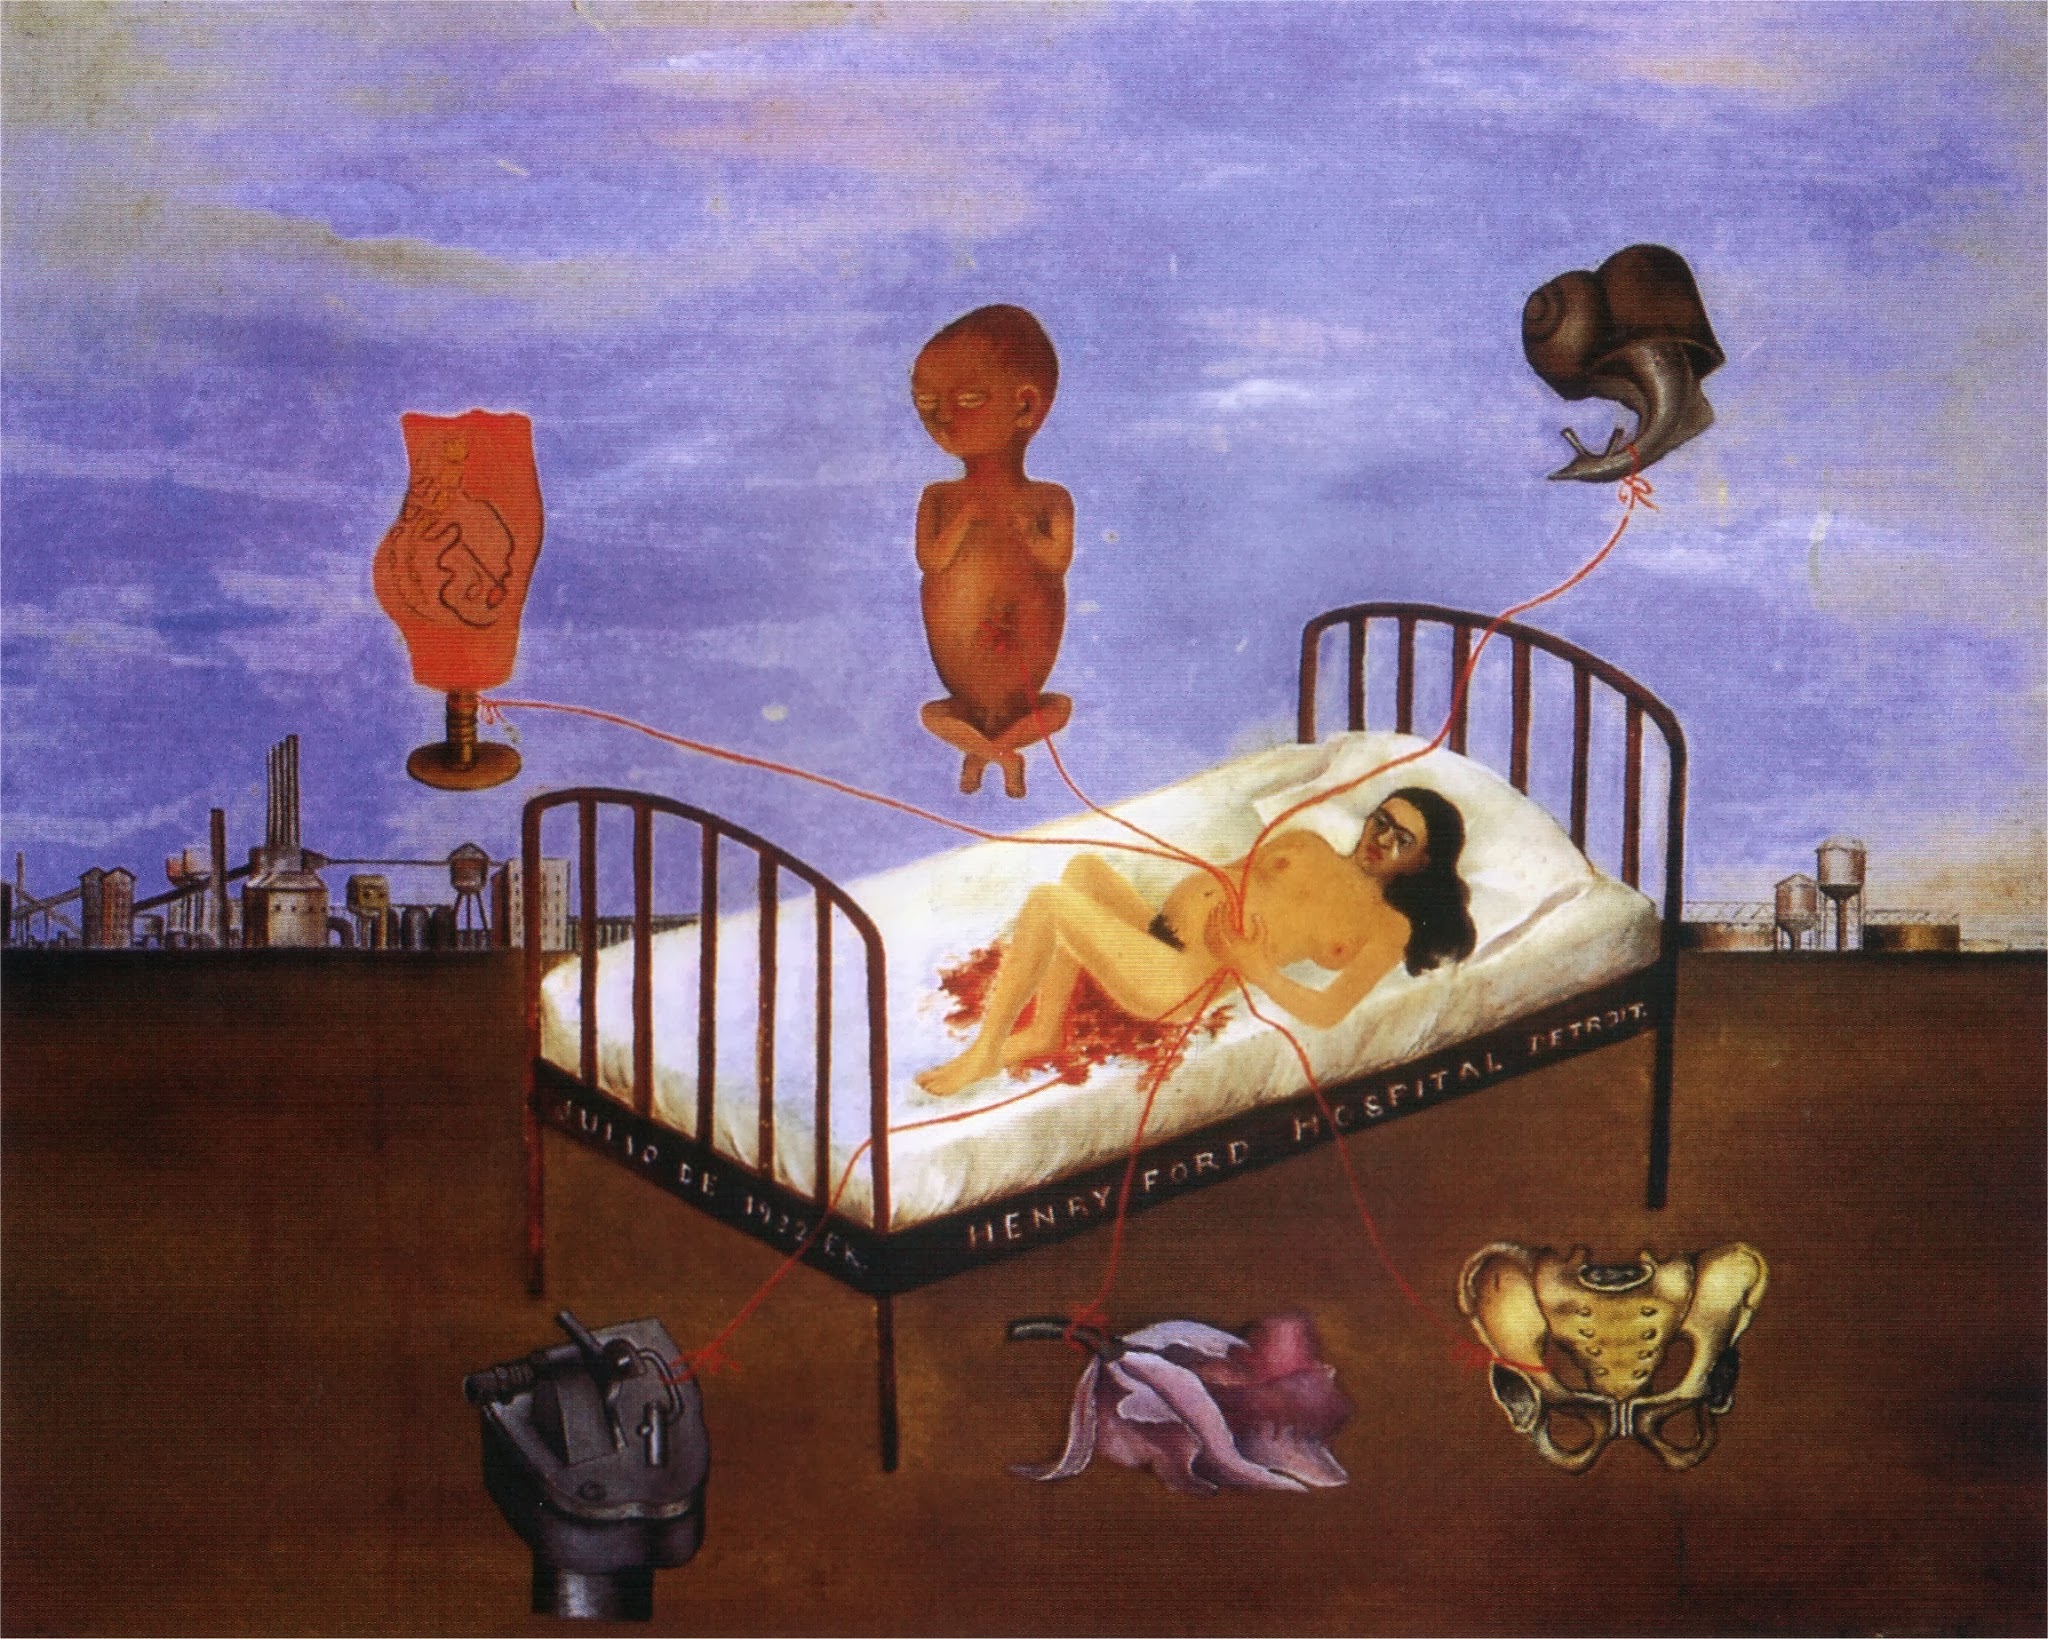 Frida kahlo henry ford hospital painting meaning #7